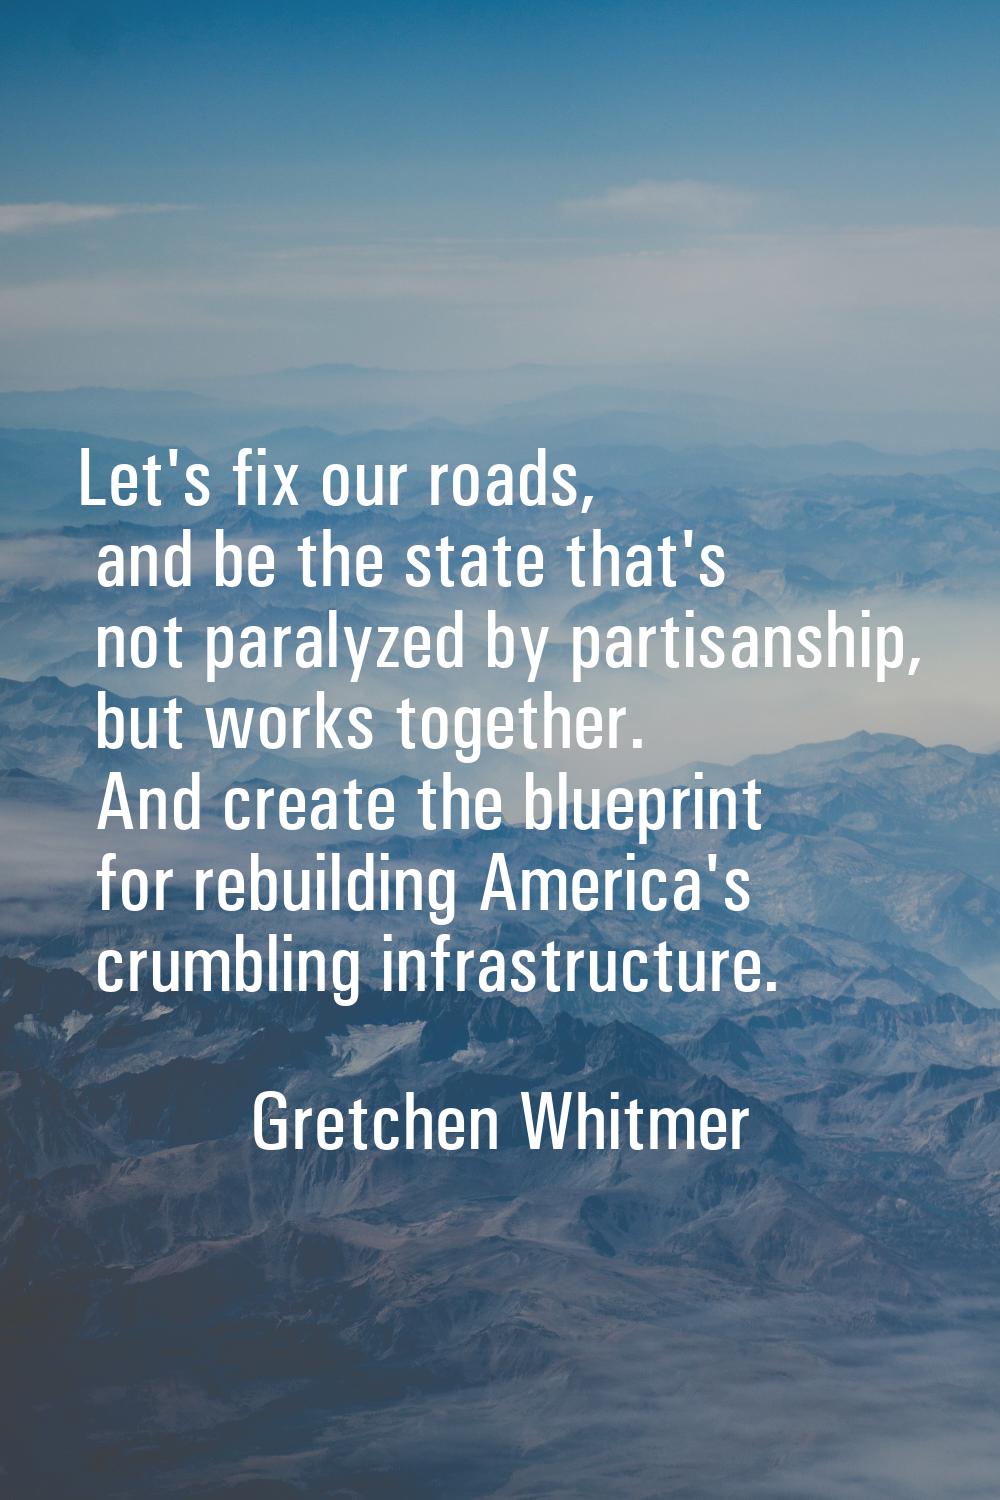 Let's fix our roads, and be the state that's not paralyzed by partisanship, but works together. And